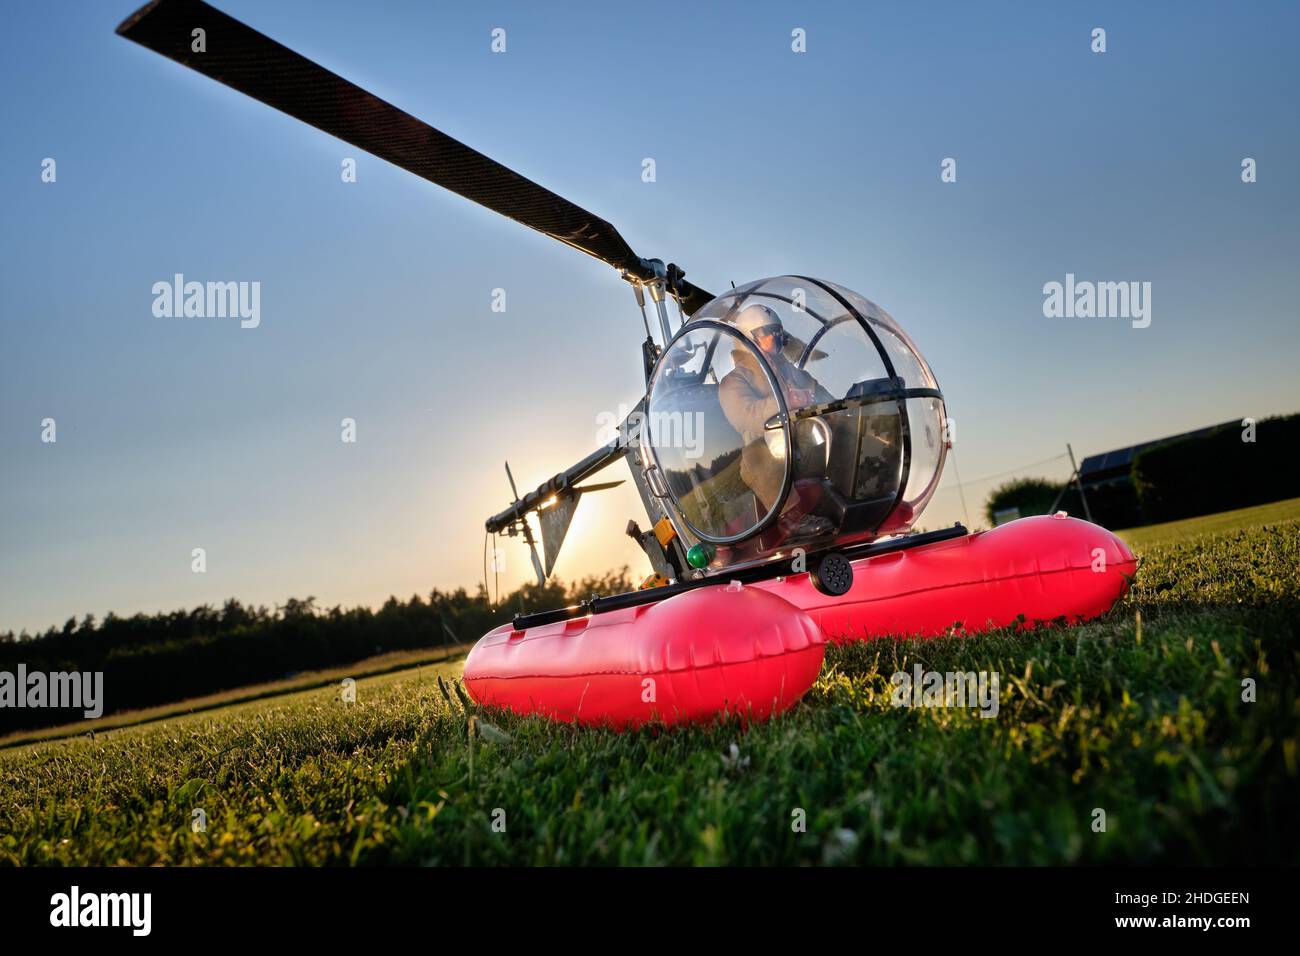 Neunhof, Germany - June 17, 2021: The Heli Baby NT of the german brand Minicopter, a radio controlled model helicopter with a pilot doll and utility f Stock Photo